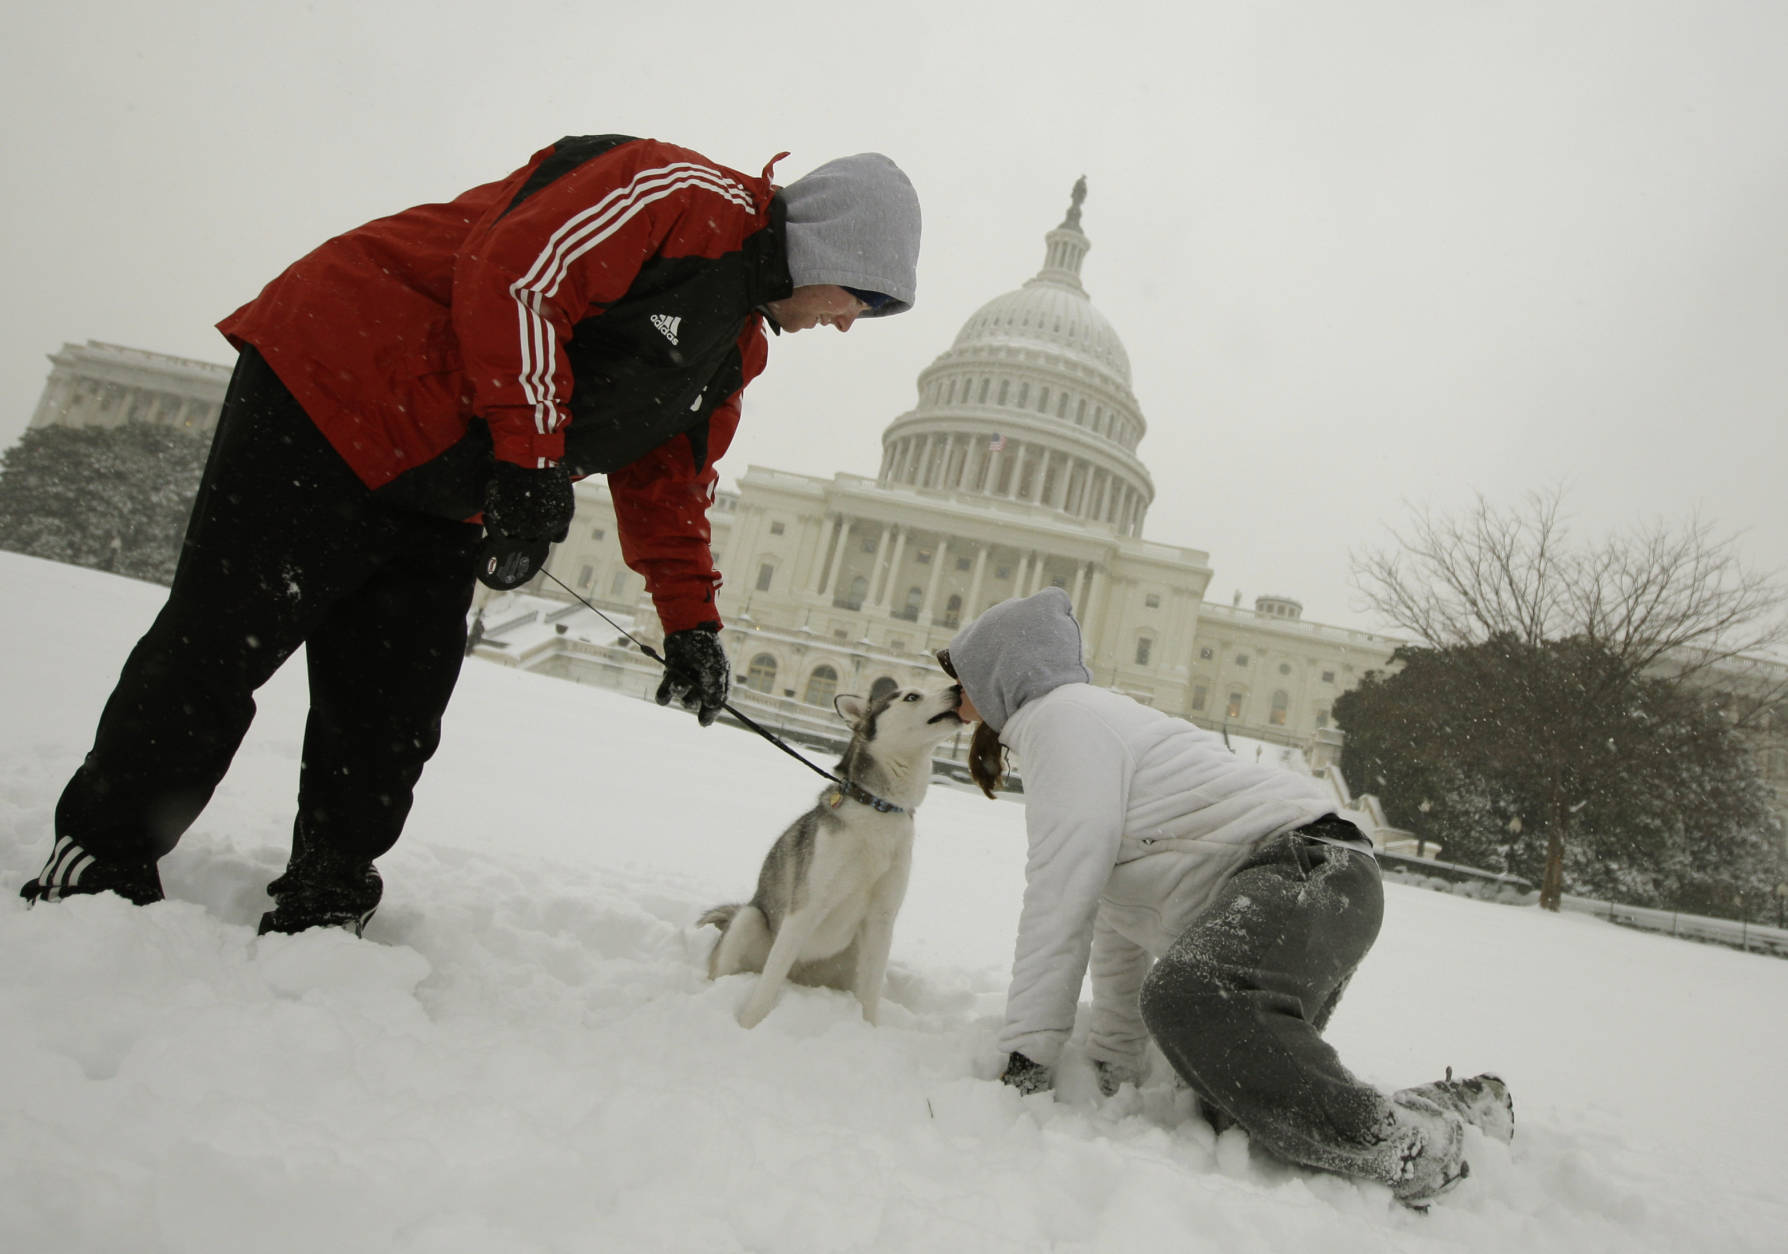 "Tiki" a Siberian Husky, gets a kiss from Danielle Fiedler, with Ryan Tronovitch, left,  as they play in the snow on the west front of the Capitol in Washington, Saturday, Dec. 19, 2009. (AP Photo/Alex Brandon)